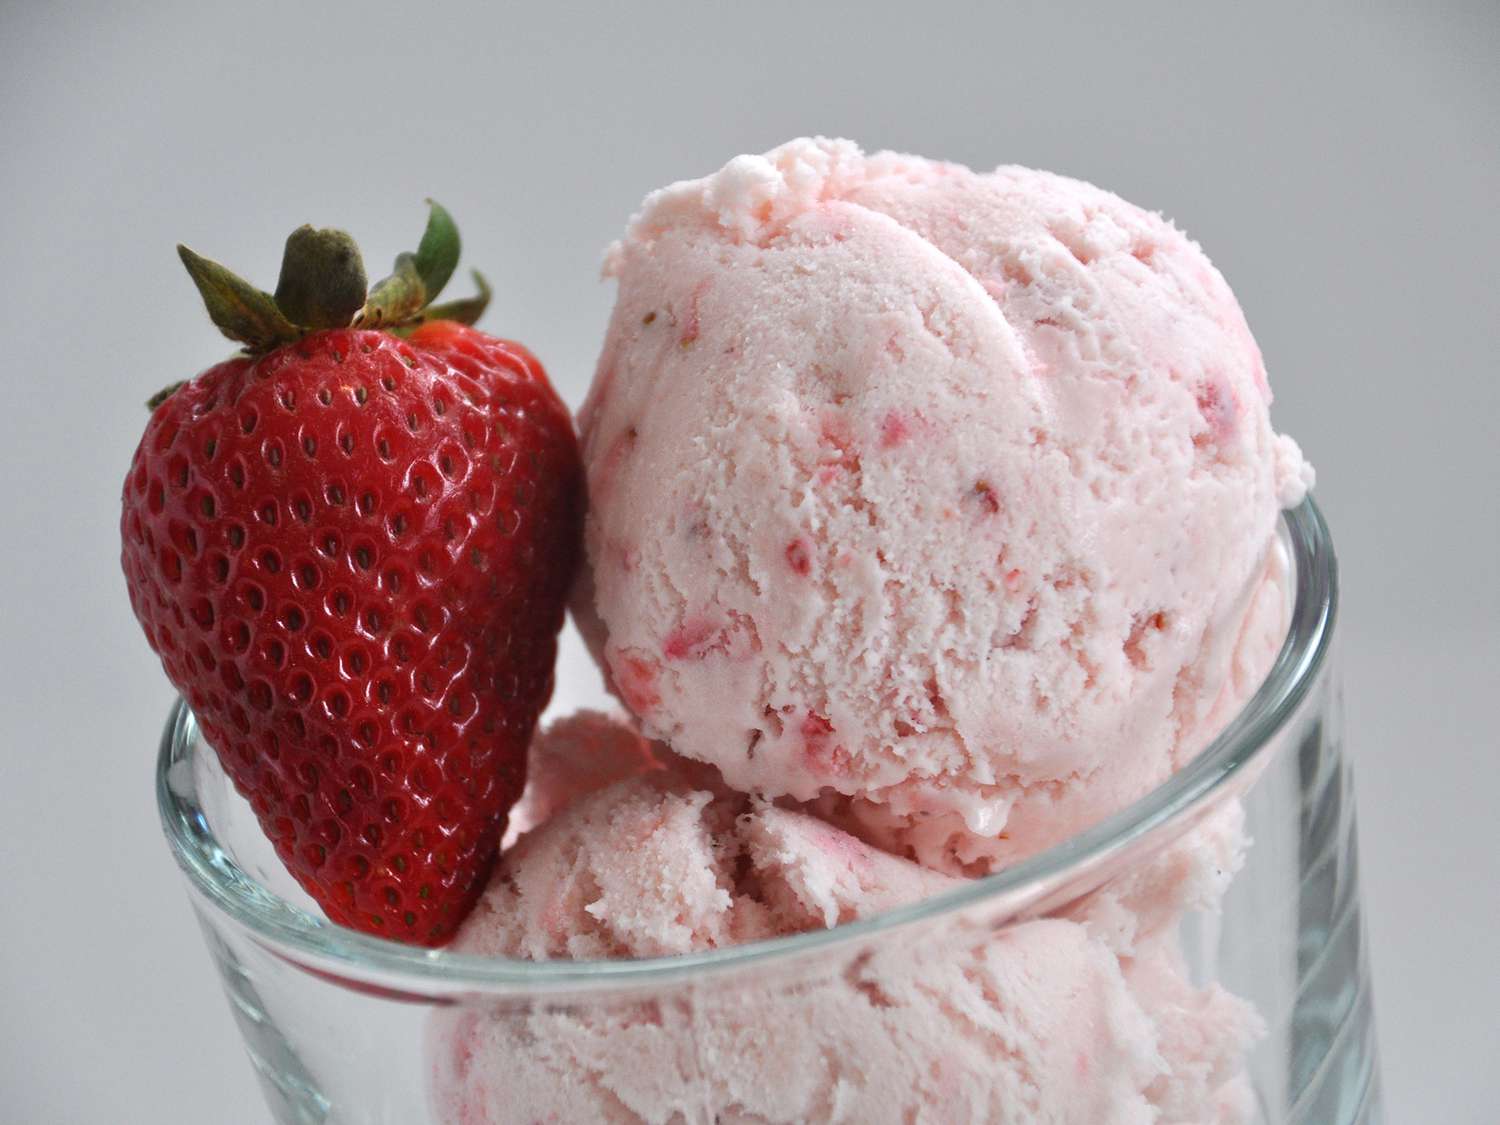 close up view of scoops of strawberry ice cream garnished with a strawberry in a glass